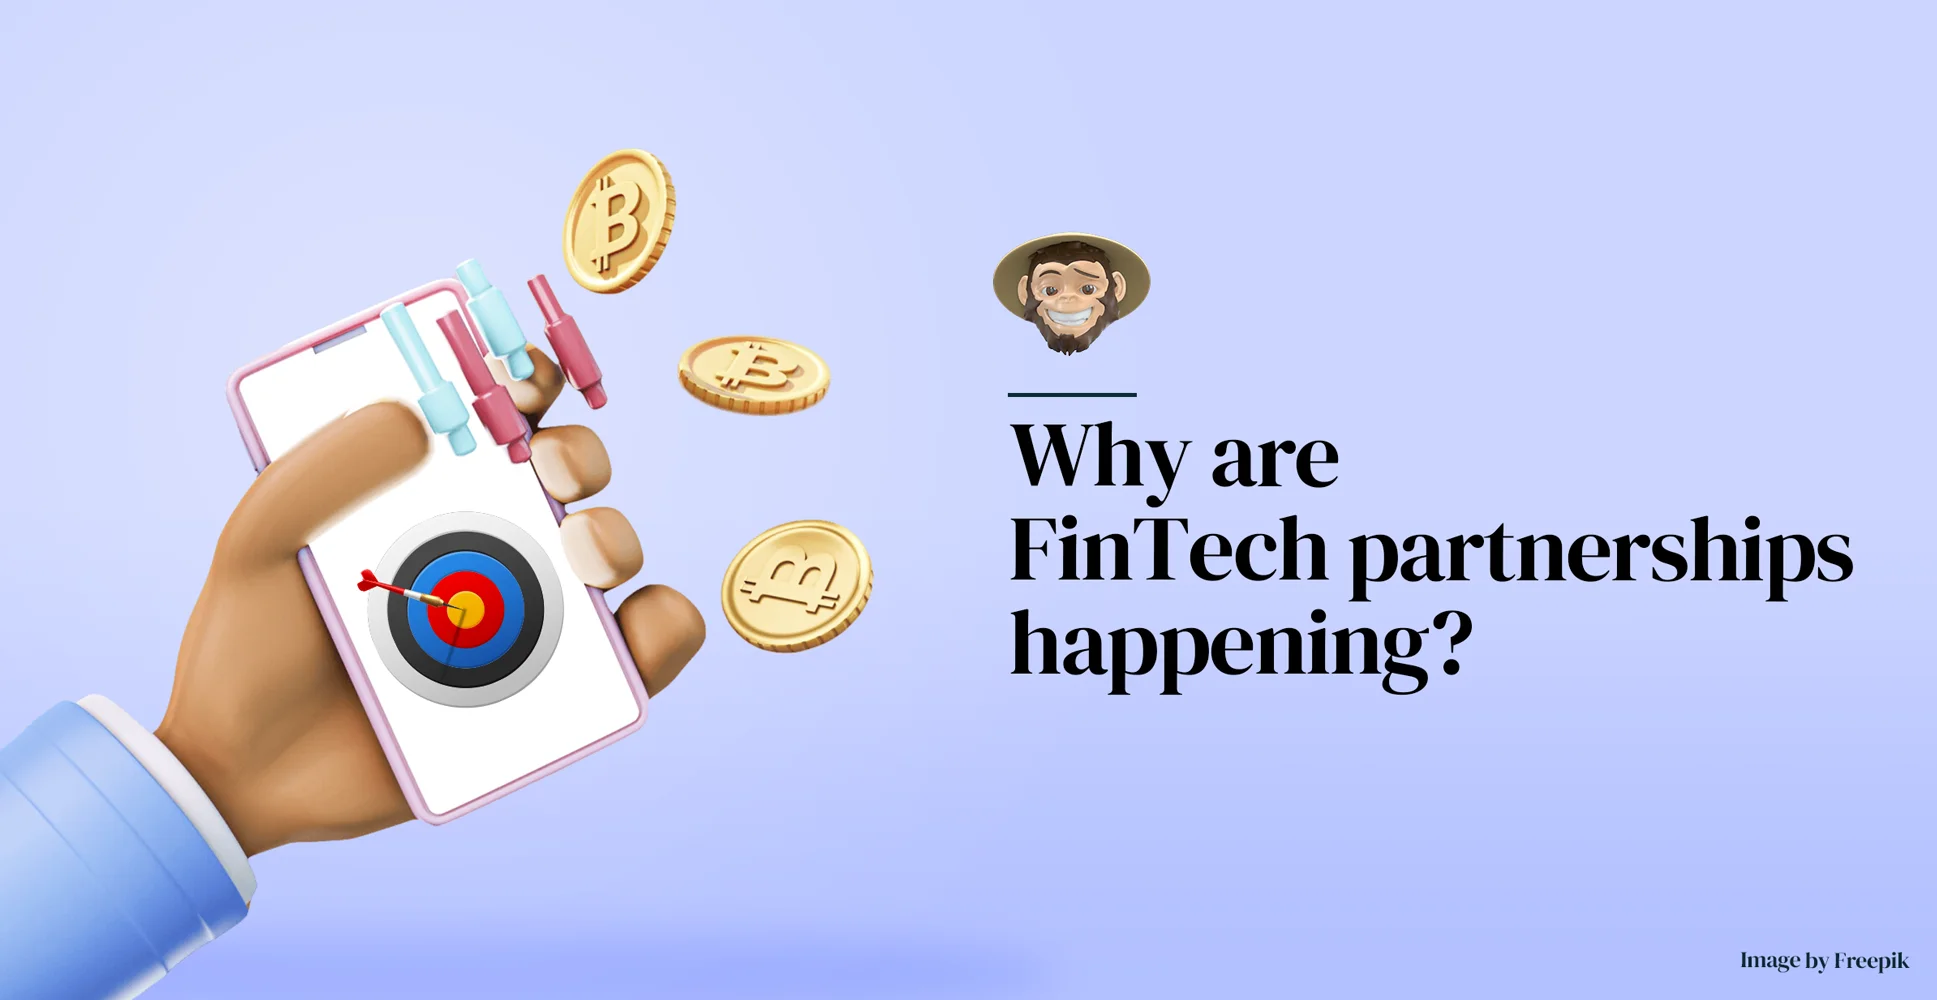 Why are FinTech partnerships happening?